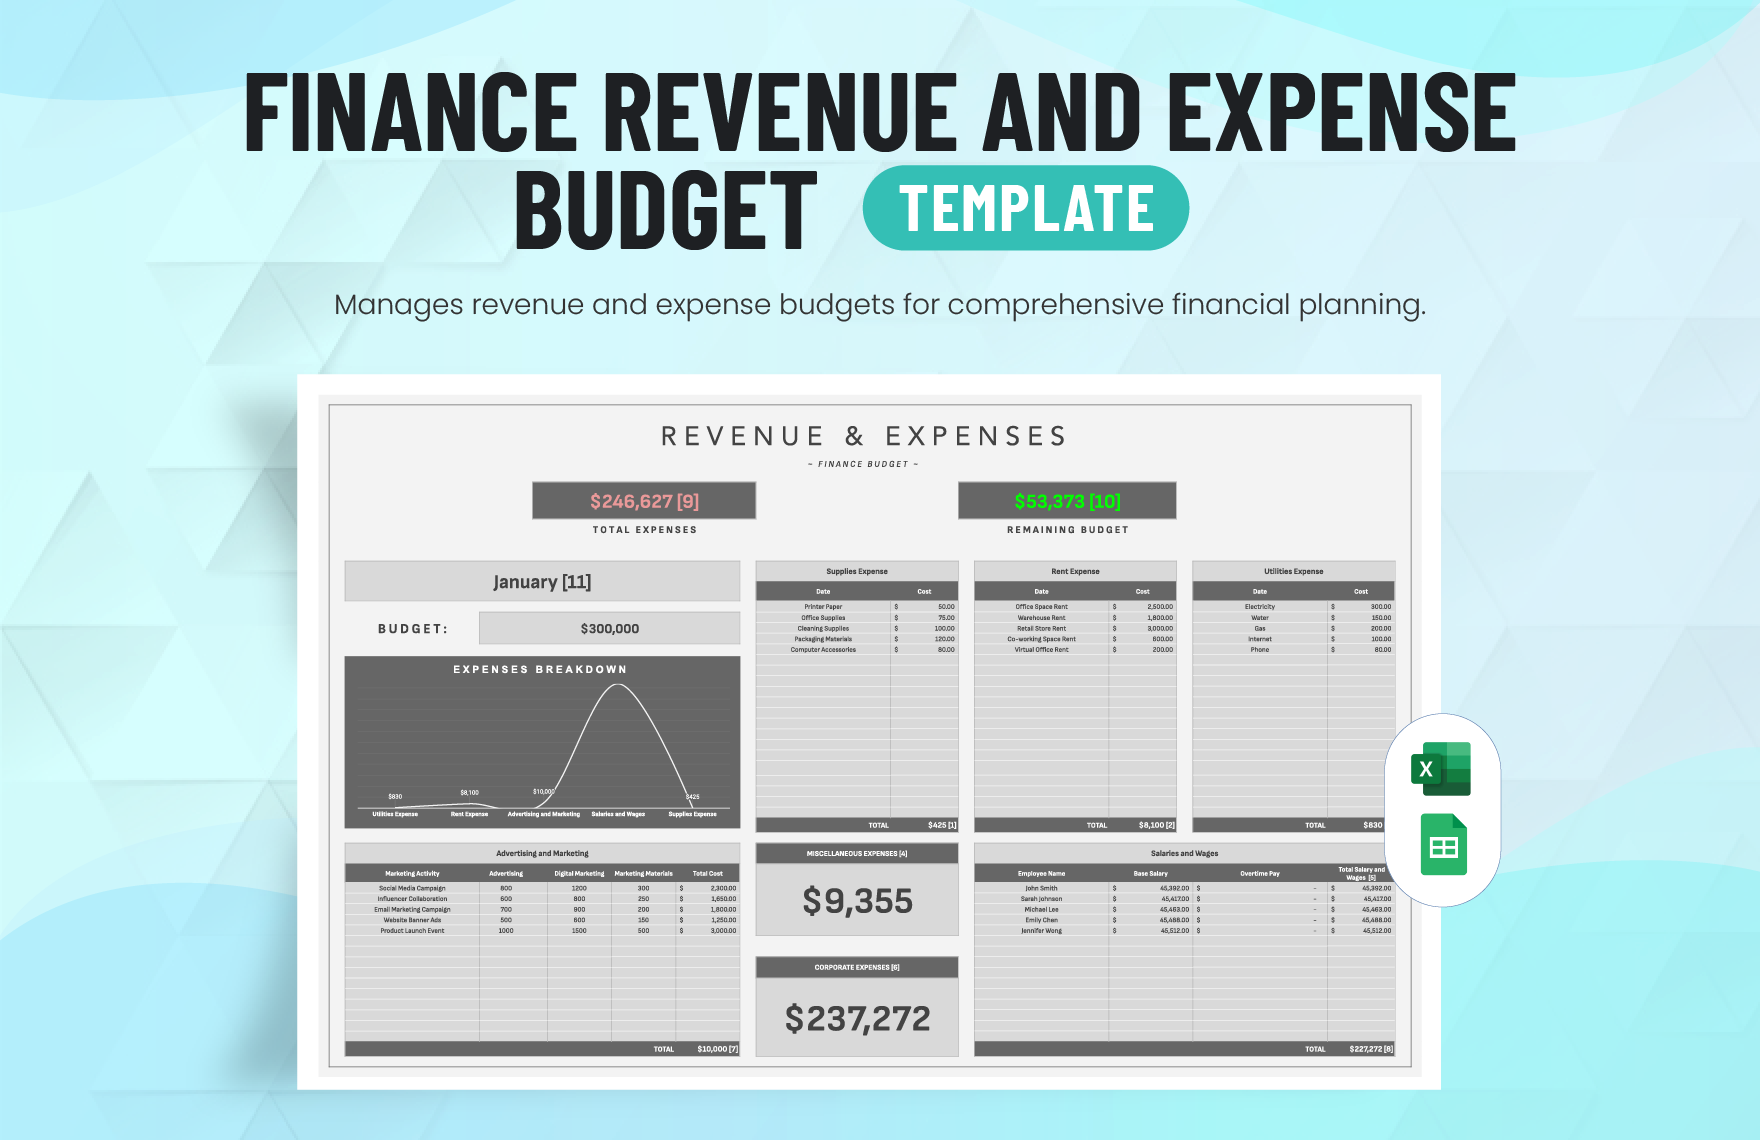 Finance Revenue and Expense Budget Template in Excel, Google Sheets